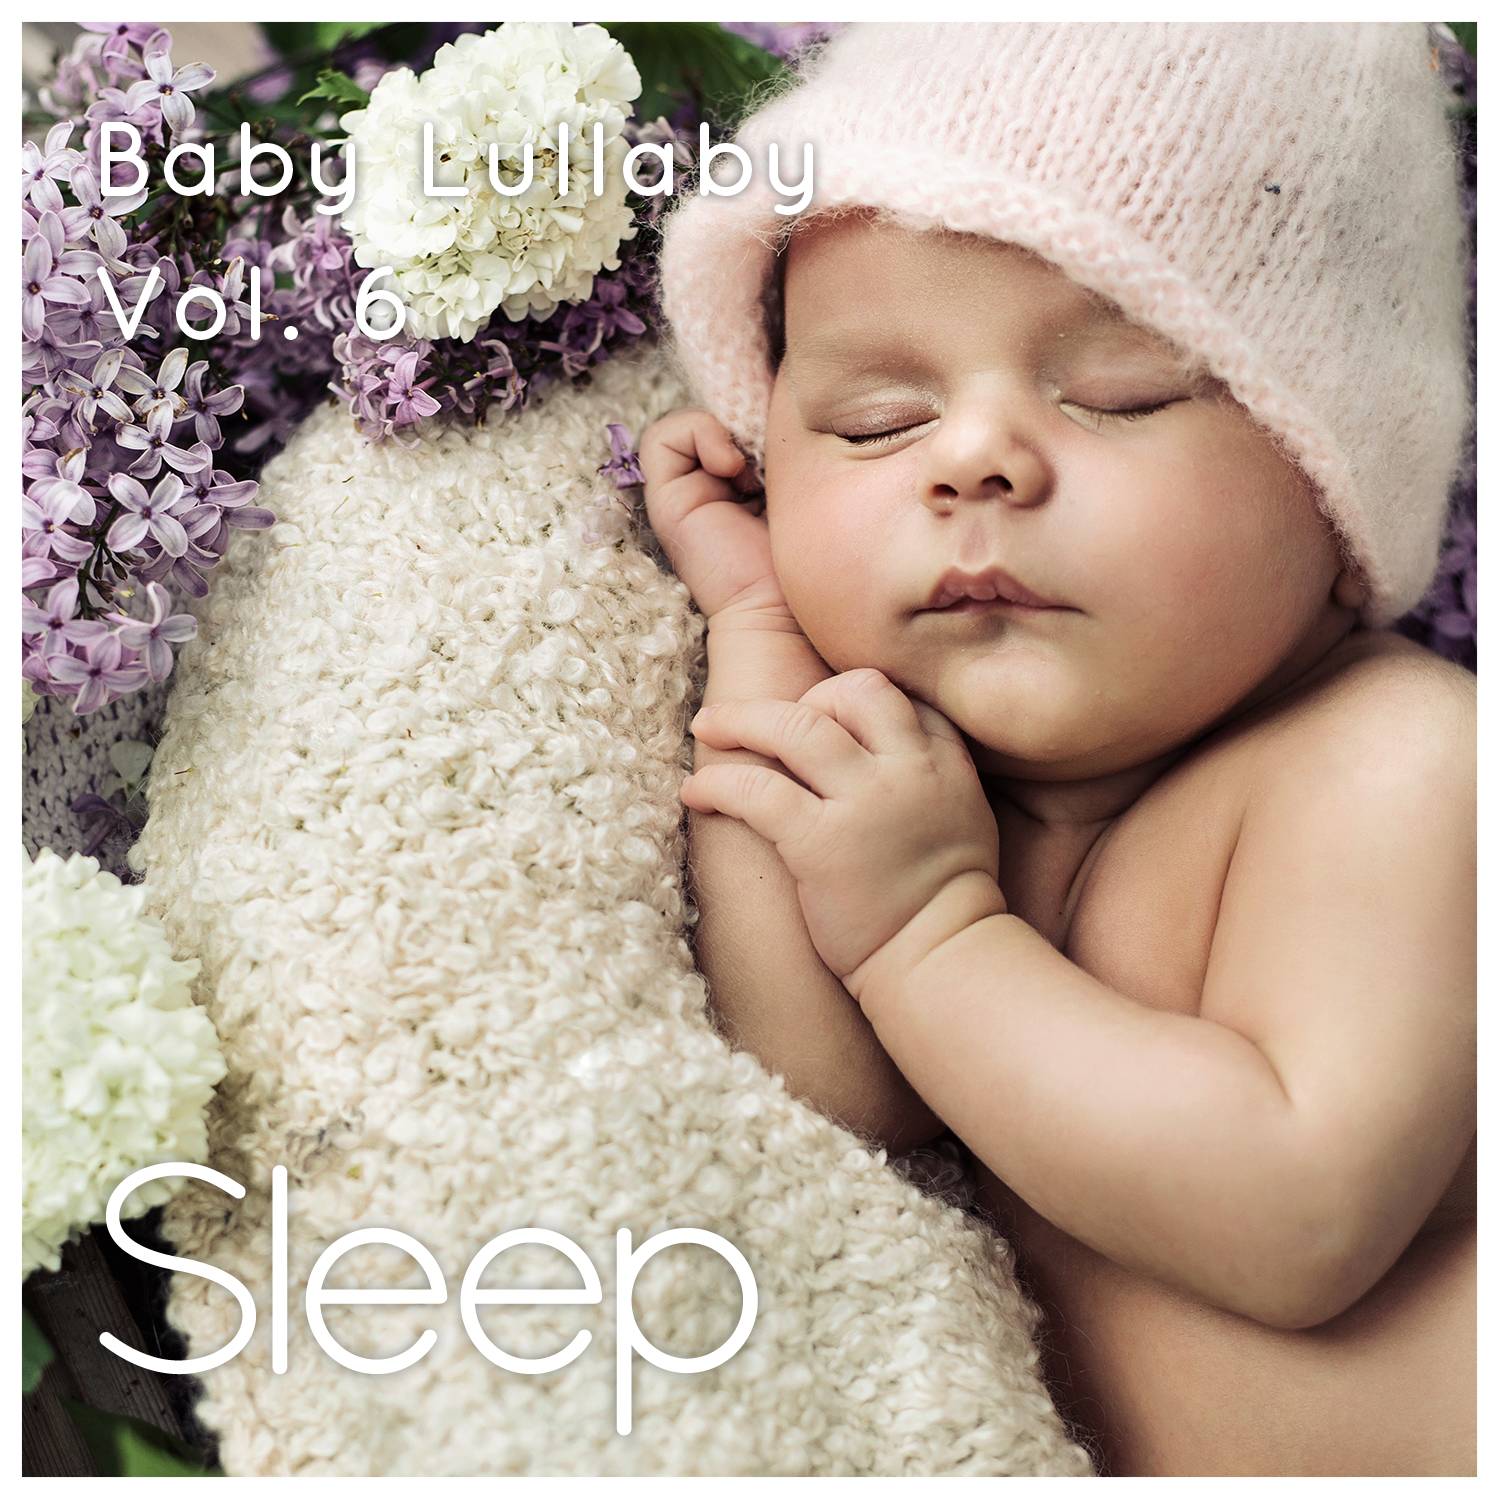 Baby Sleep Ambient Lullaby, Pt. 29